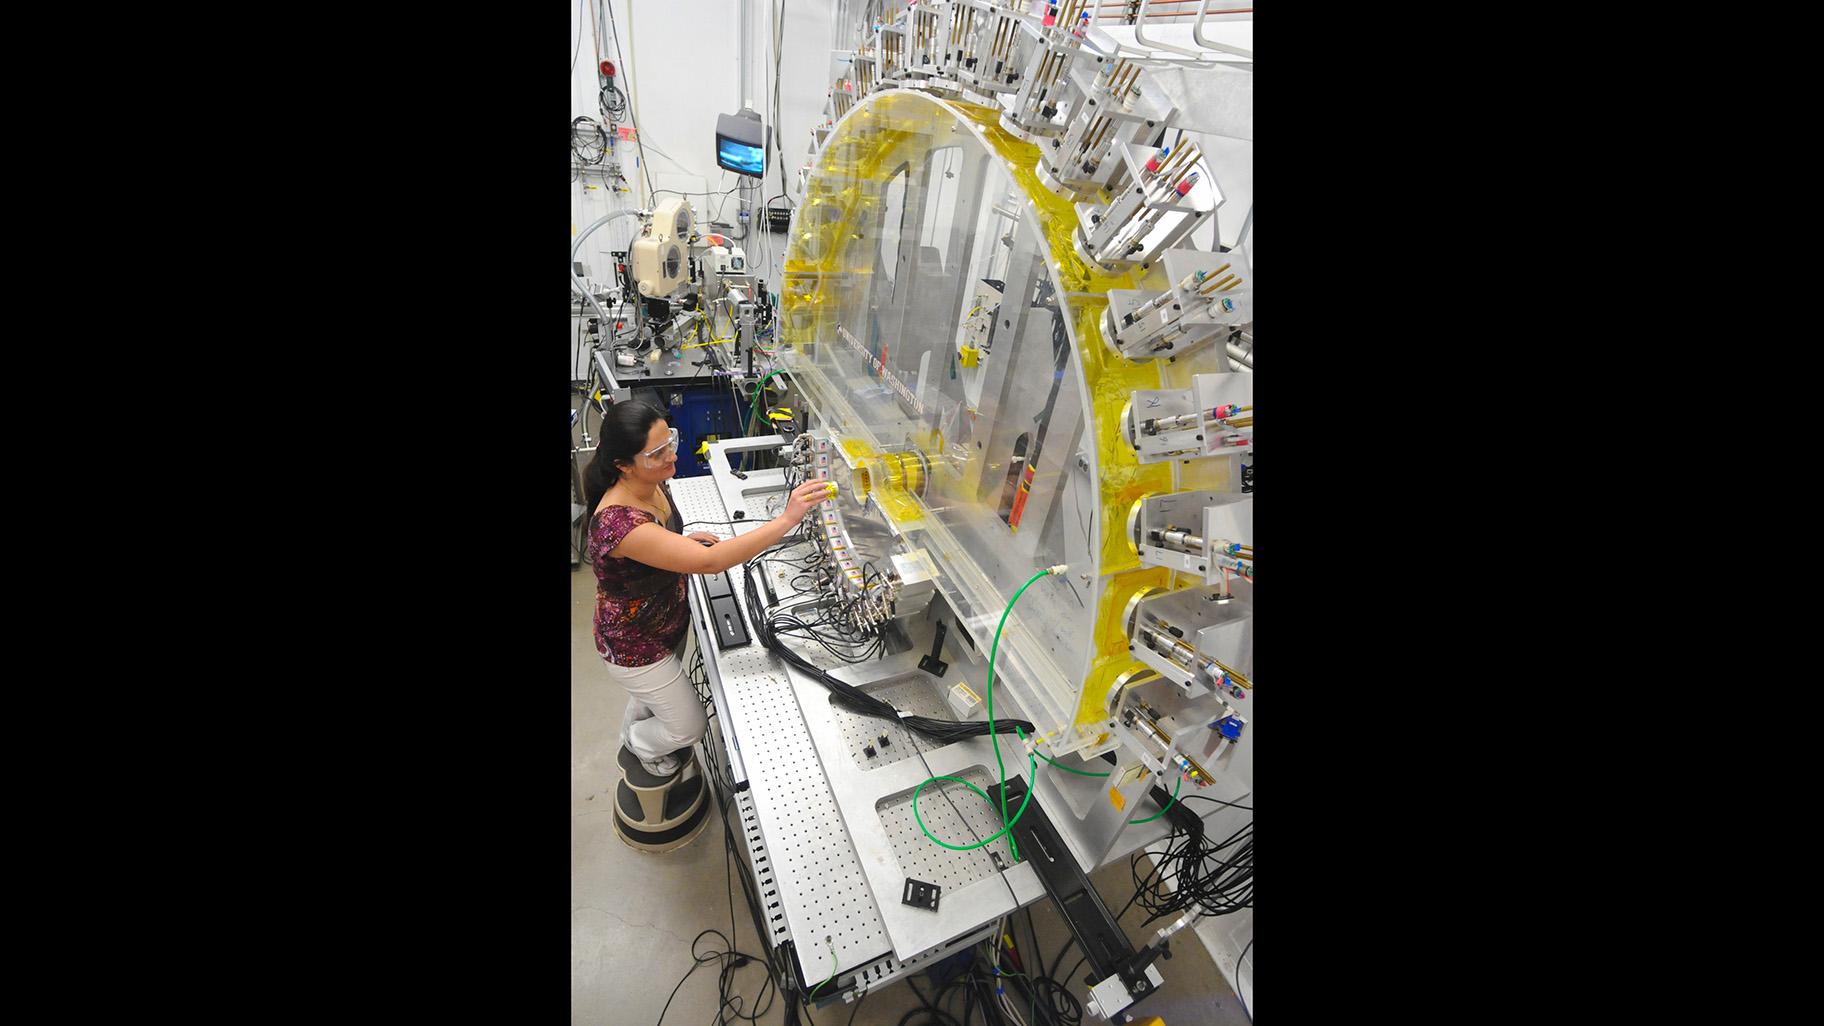 Argonne National Laboratory assistance materials scientist loads an in-situ-lithium-ion battery into the Low-Energy Resolution Inelastic X-ray (LERIX) system at the Advanced Photon Source. (U.S. Department of Energy / Flickr)